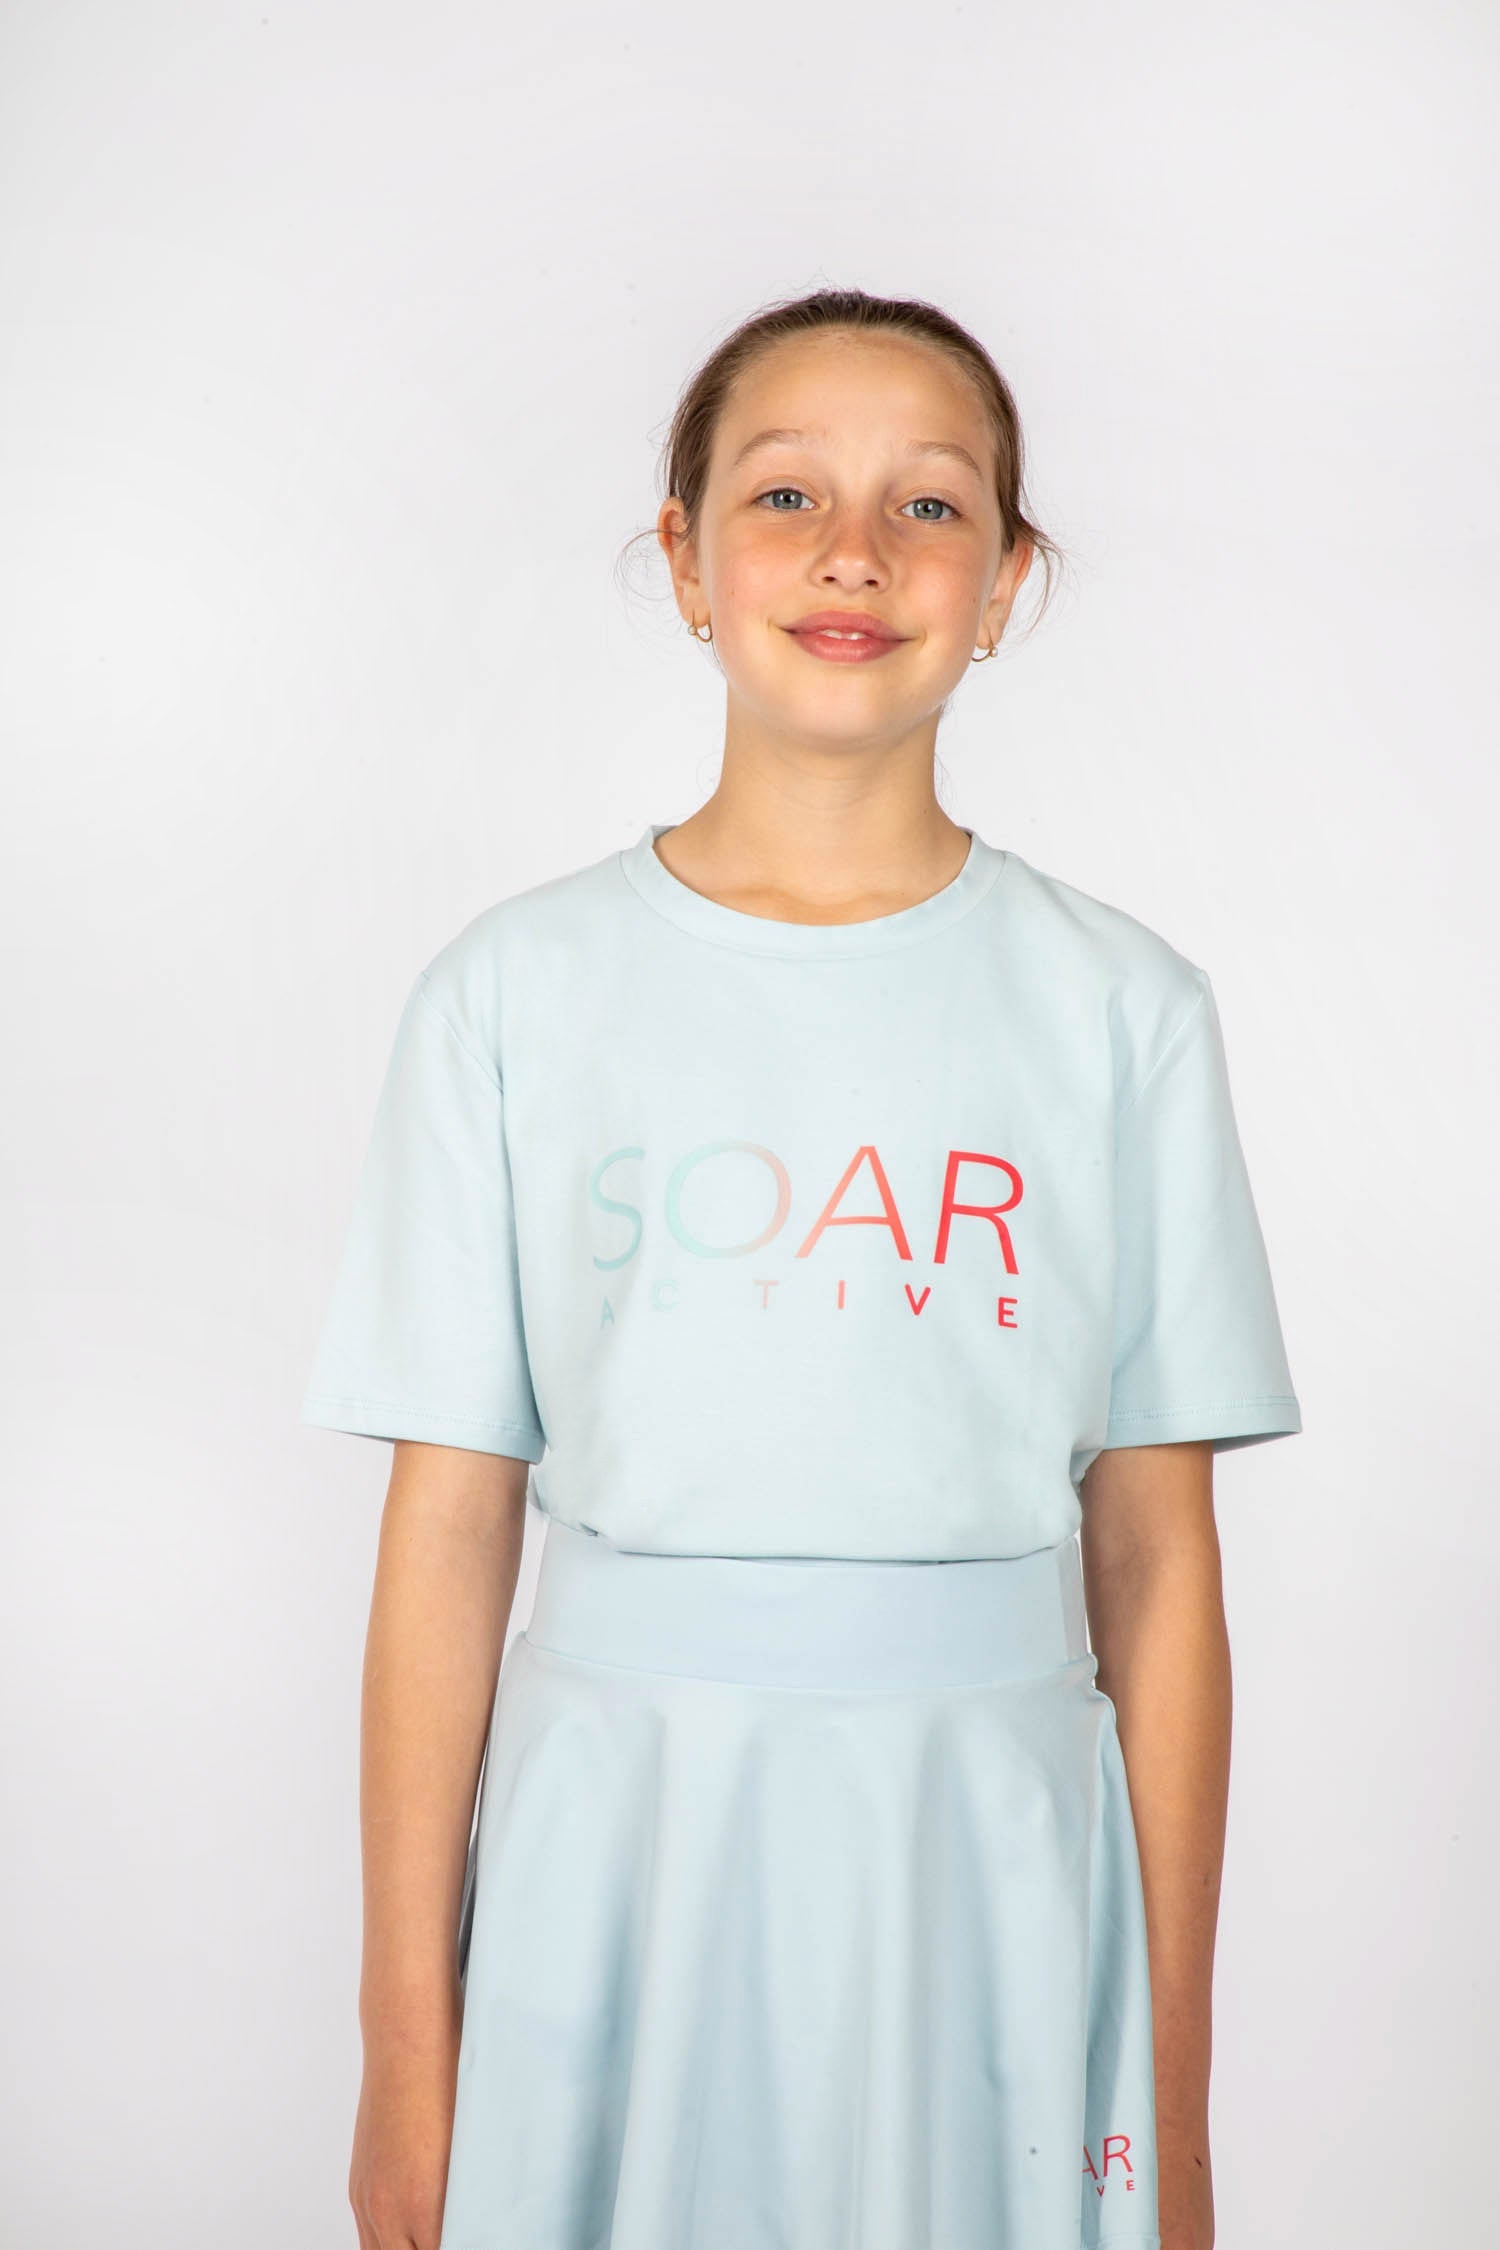 Soar Active t-shirt XS / Ice Rise Dynamic Tee